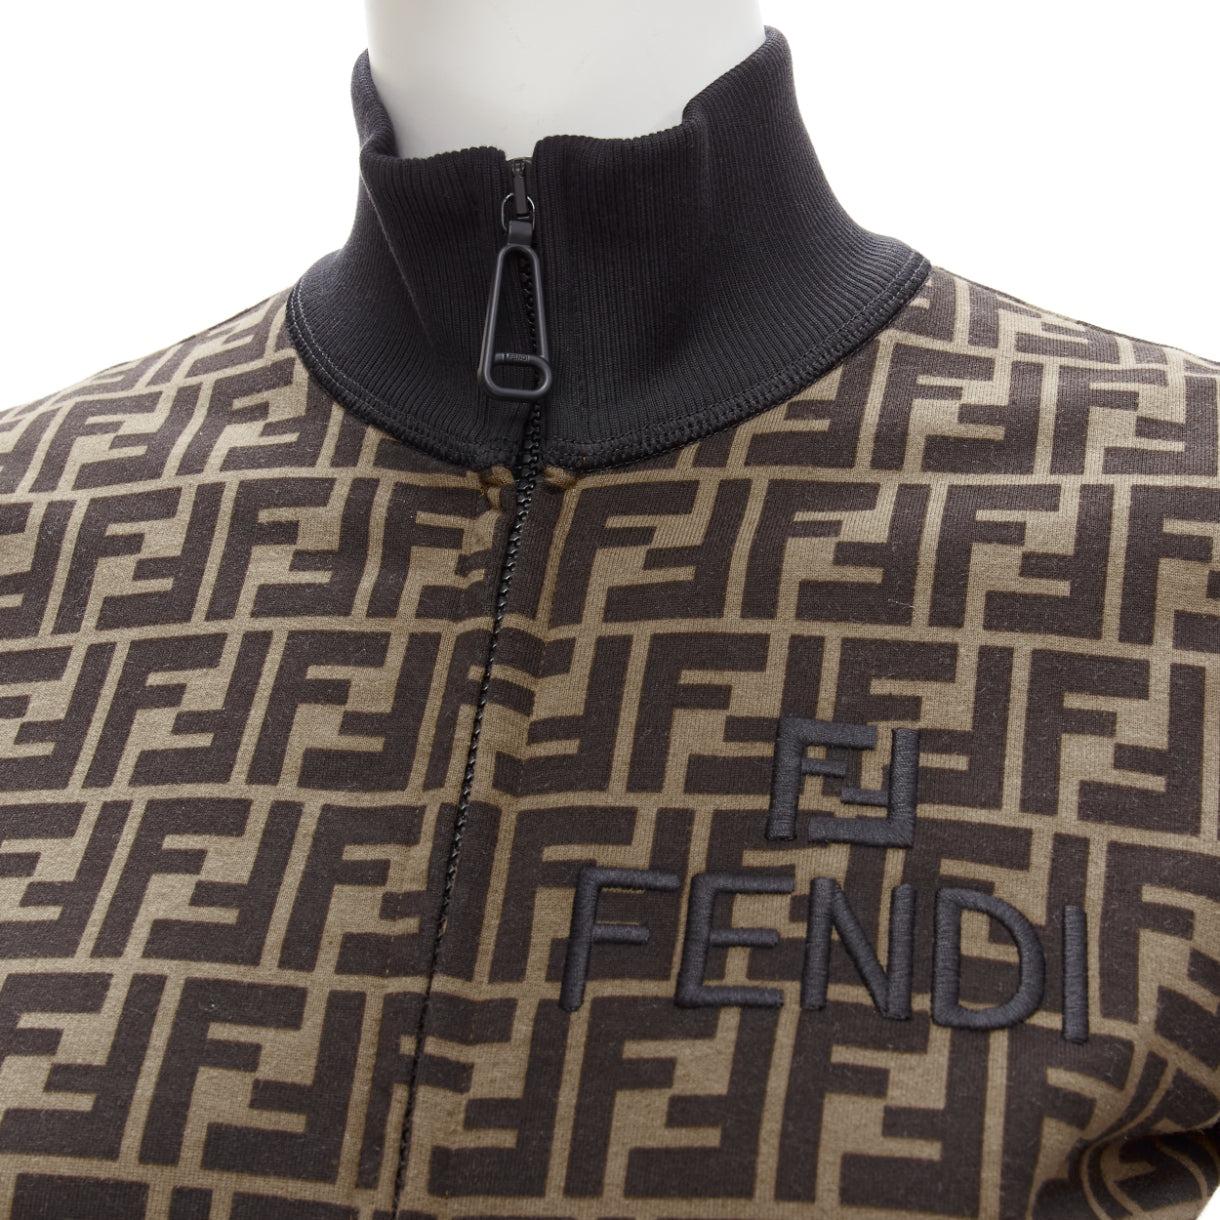 FENDI brown FF embroidery Zucca monogram cotton cropped track jacket IT40 S
Reference: CNPG/A00034
Brand: Fendi
Material: Cotton
Color: Brown, Black
Pattern: Monogram
Closure: Zip
Lining: Black Fabric
Extra Details: FF embroidery logo at left